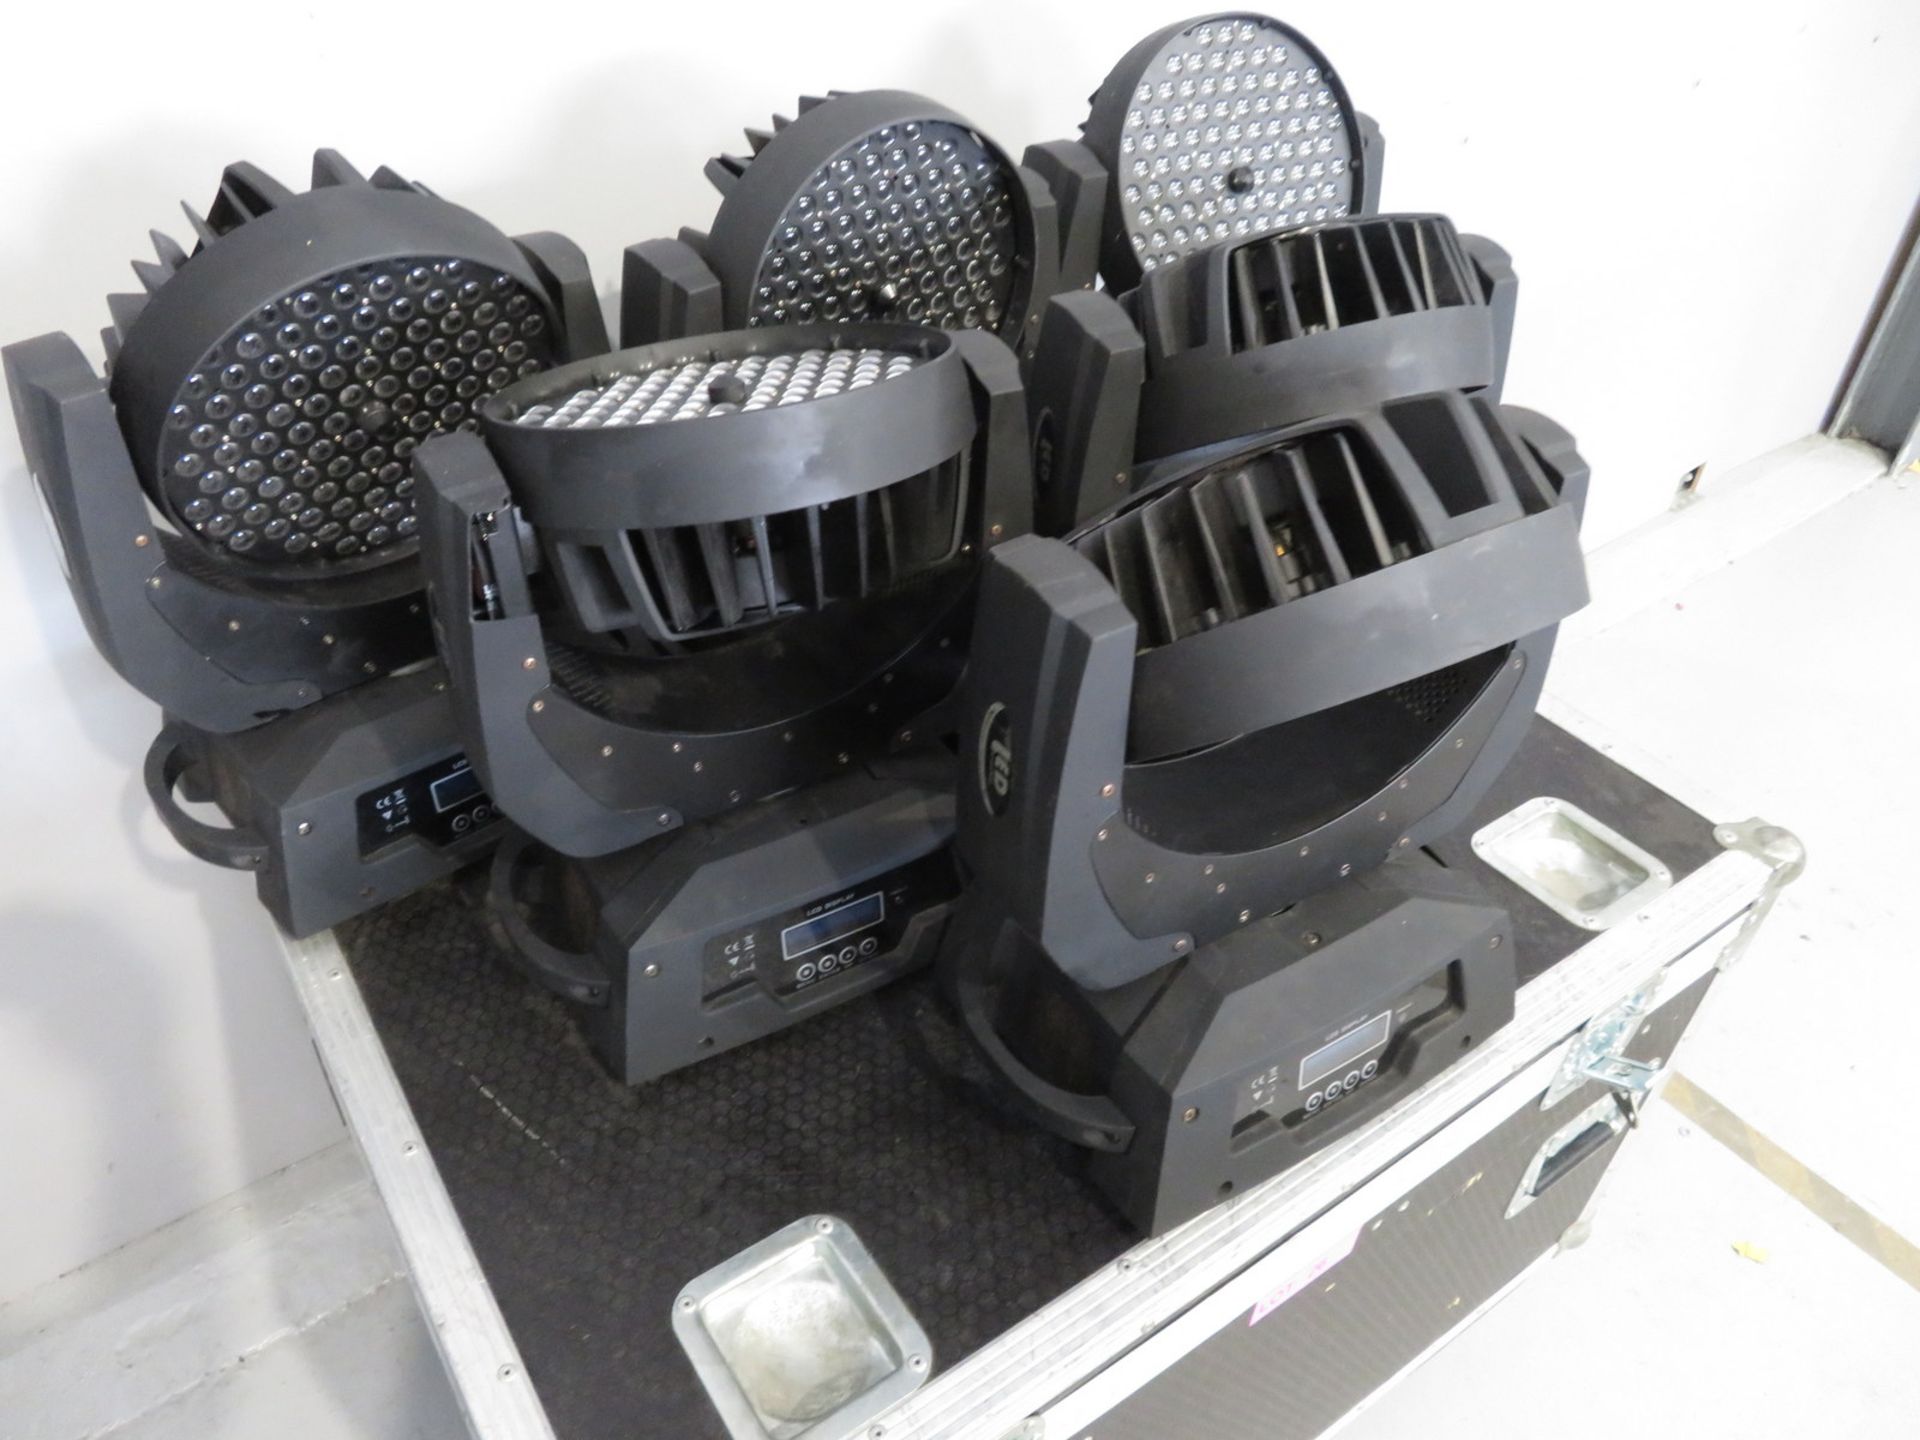 6x LED Moving head wash's in flightcase. Includes clamps but no power cables. Working Cond - Image 3 of 7